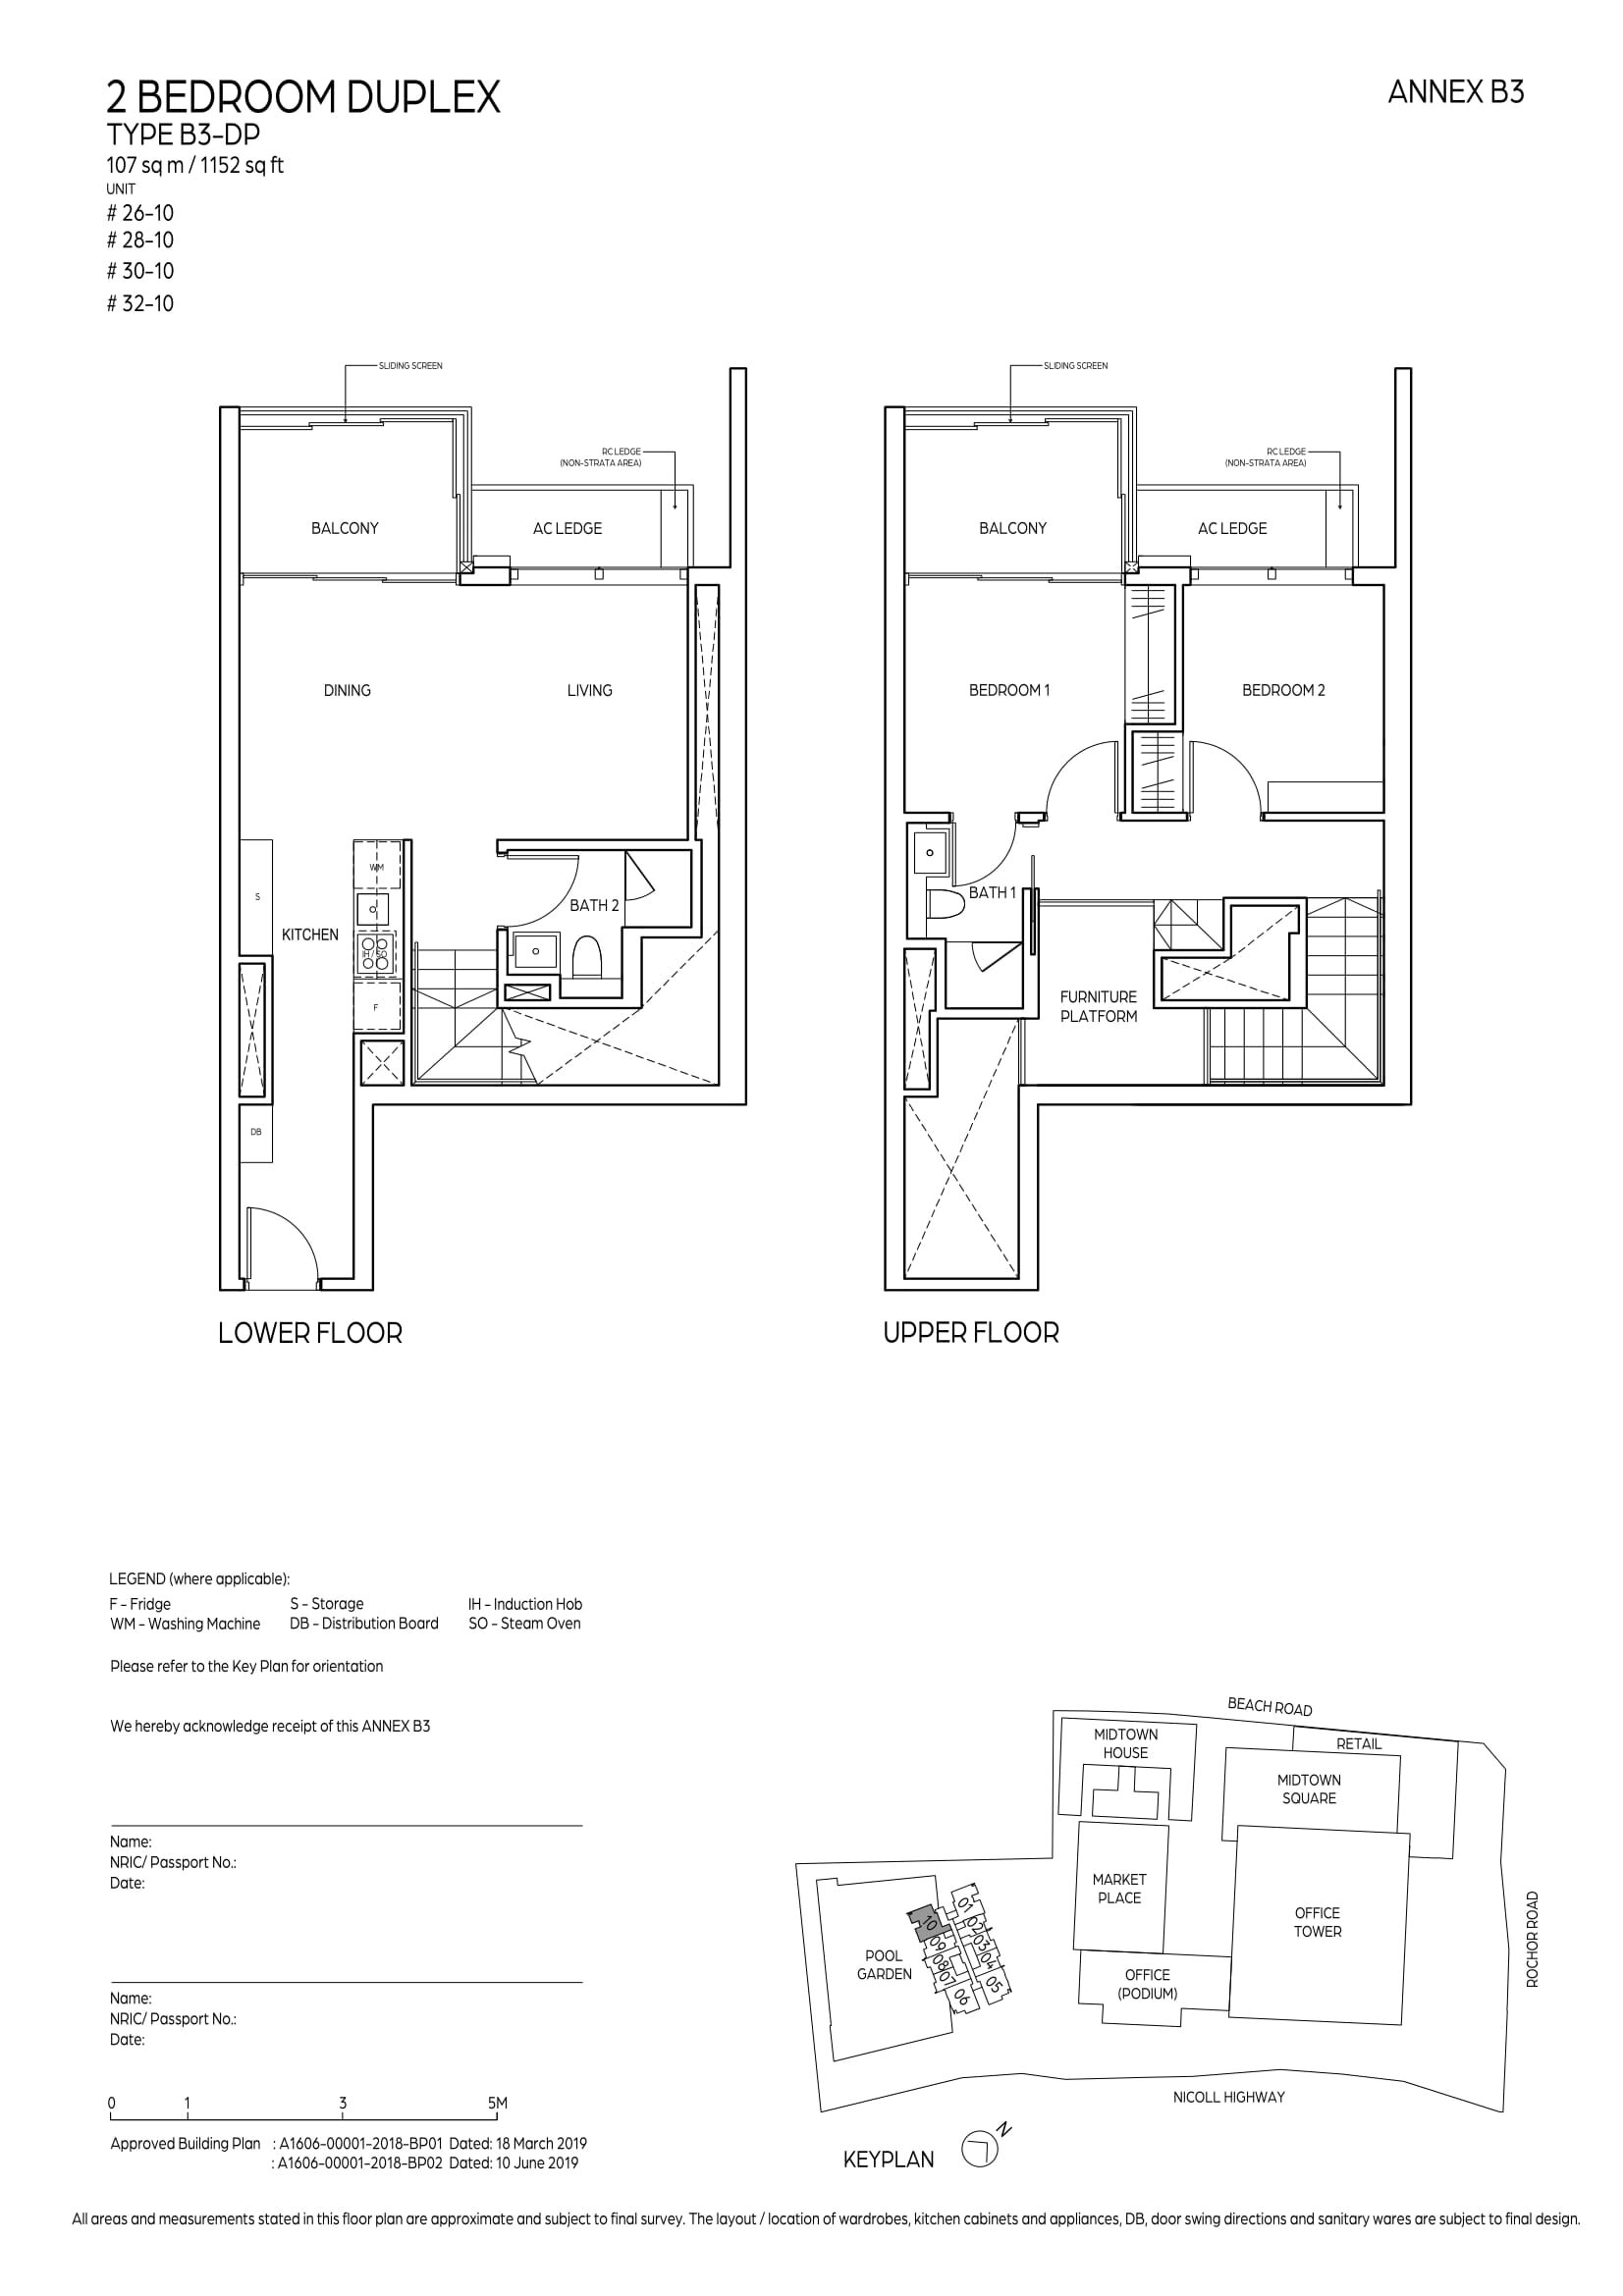 An example of a dual-key unit at Midtown Bay: 2 Bedroom Duplex B3-DP layout.